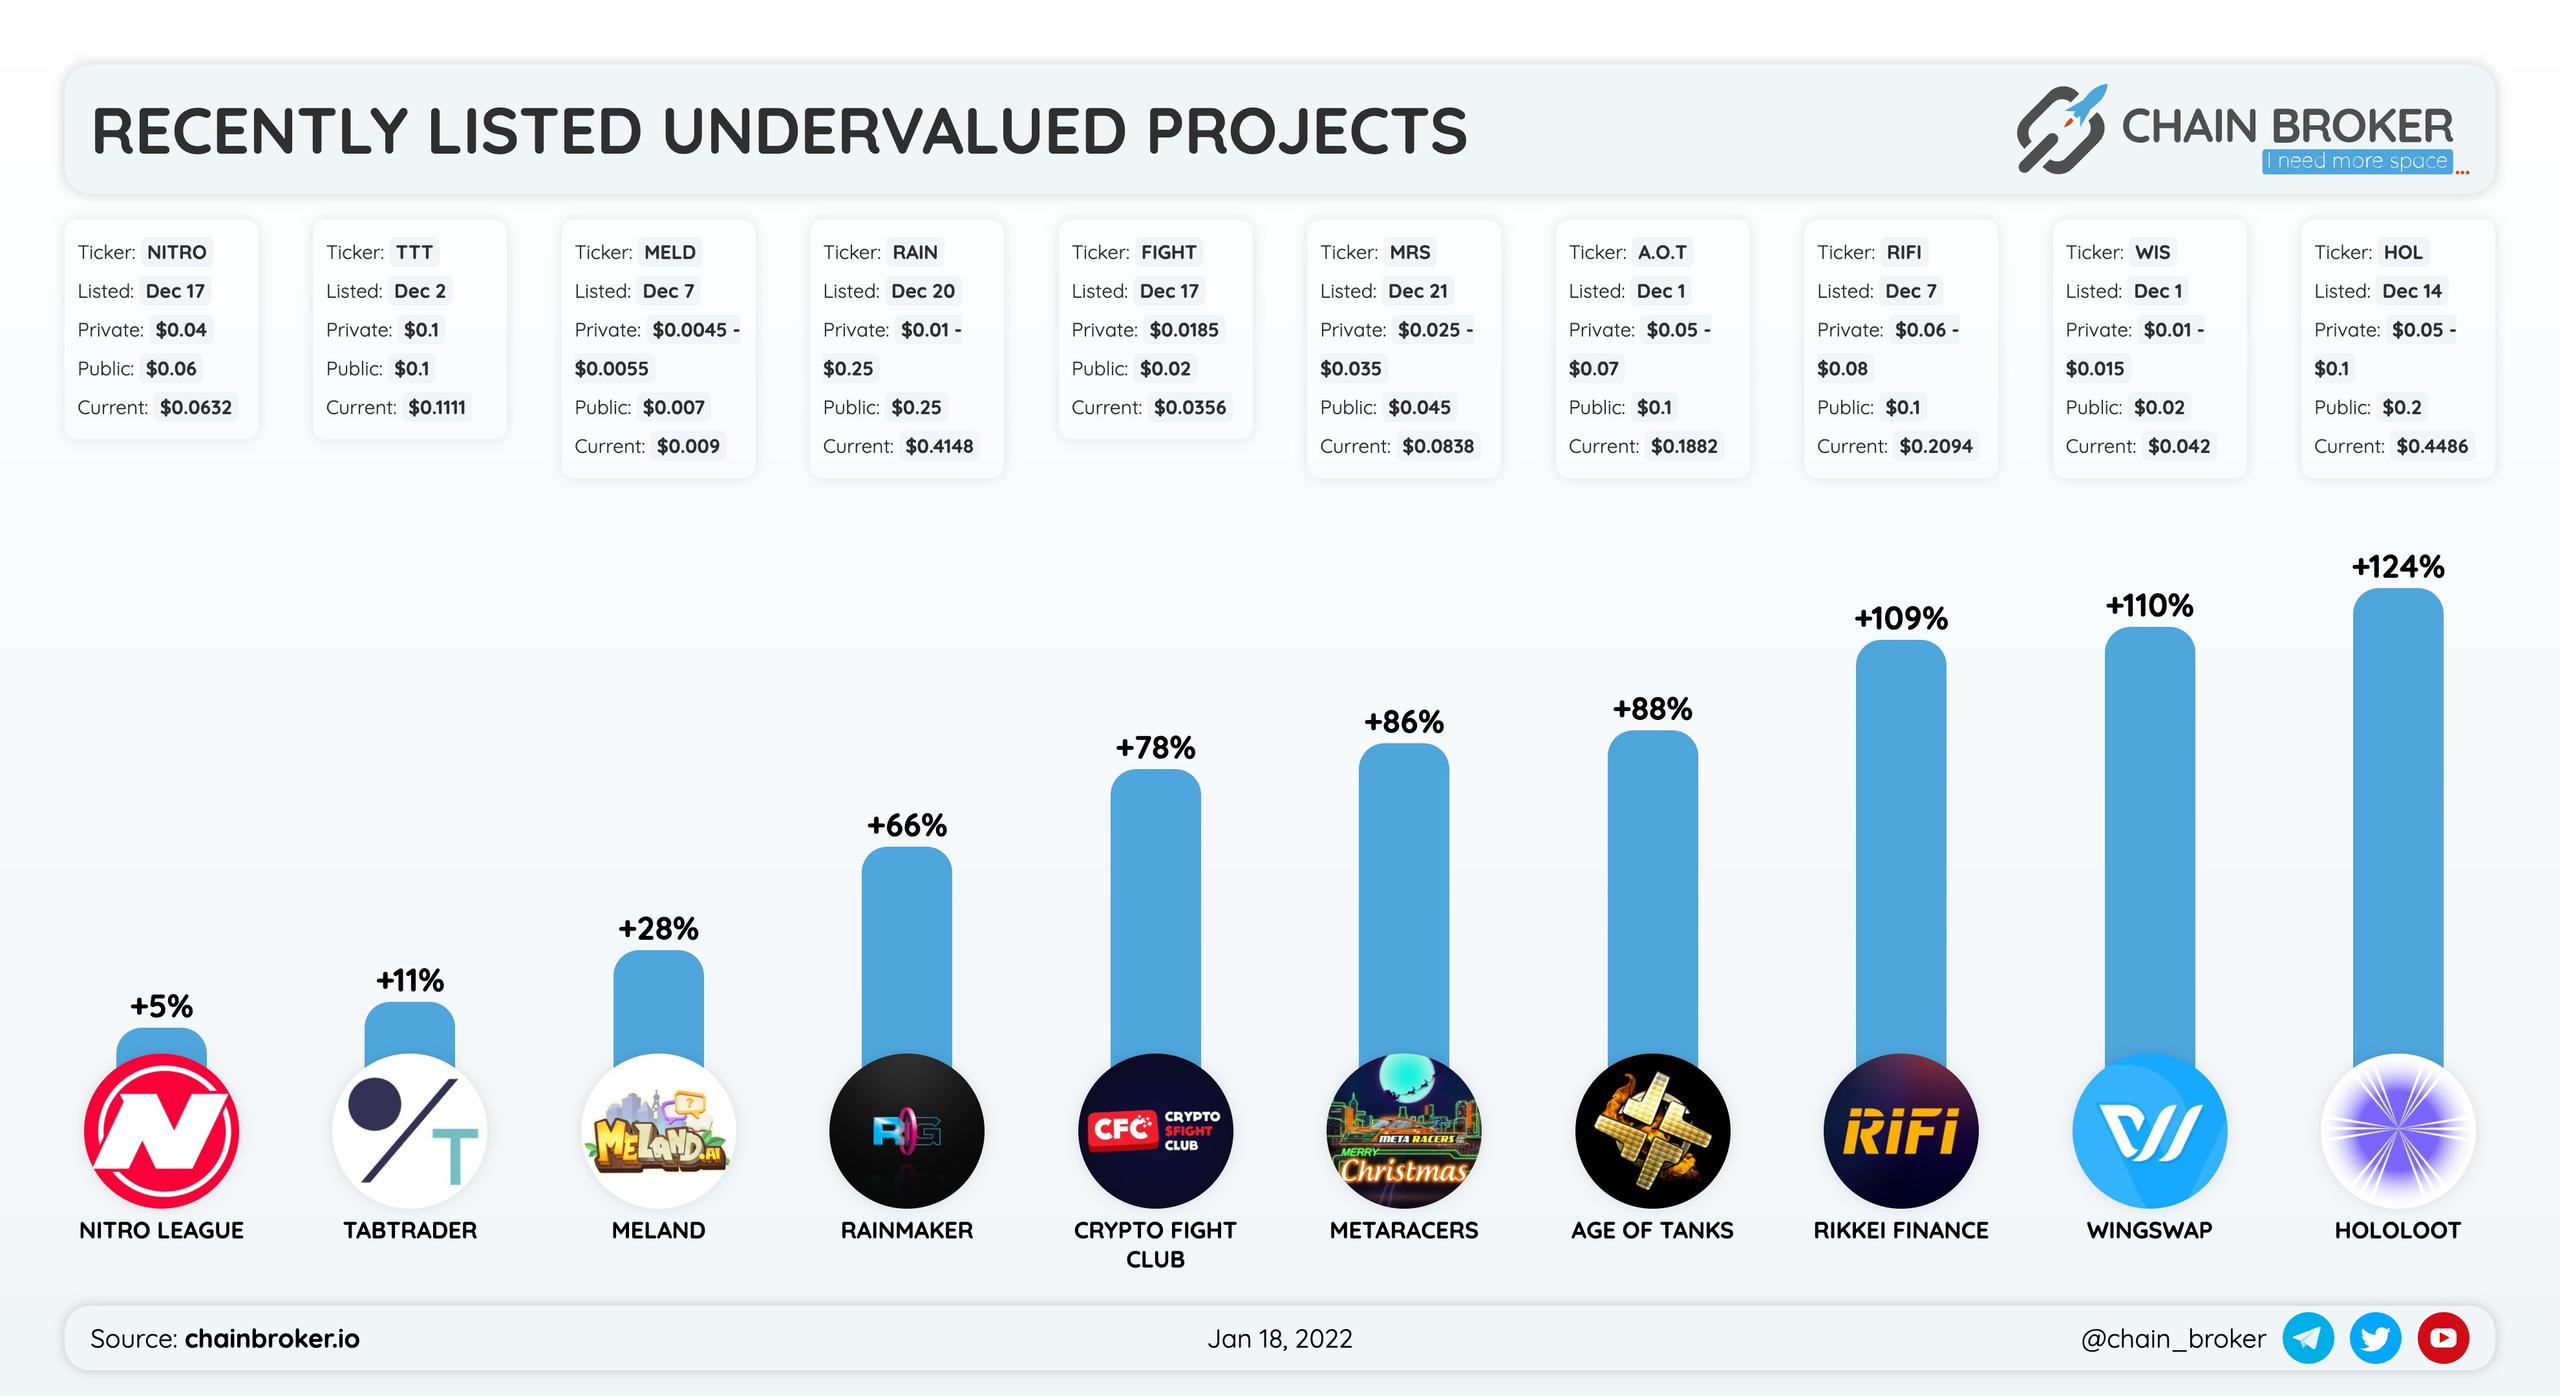 Undervalued projects ROI rated